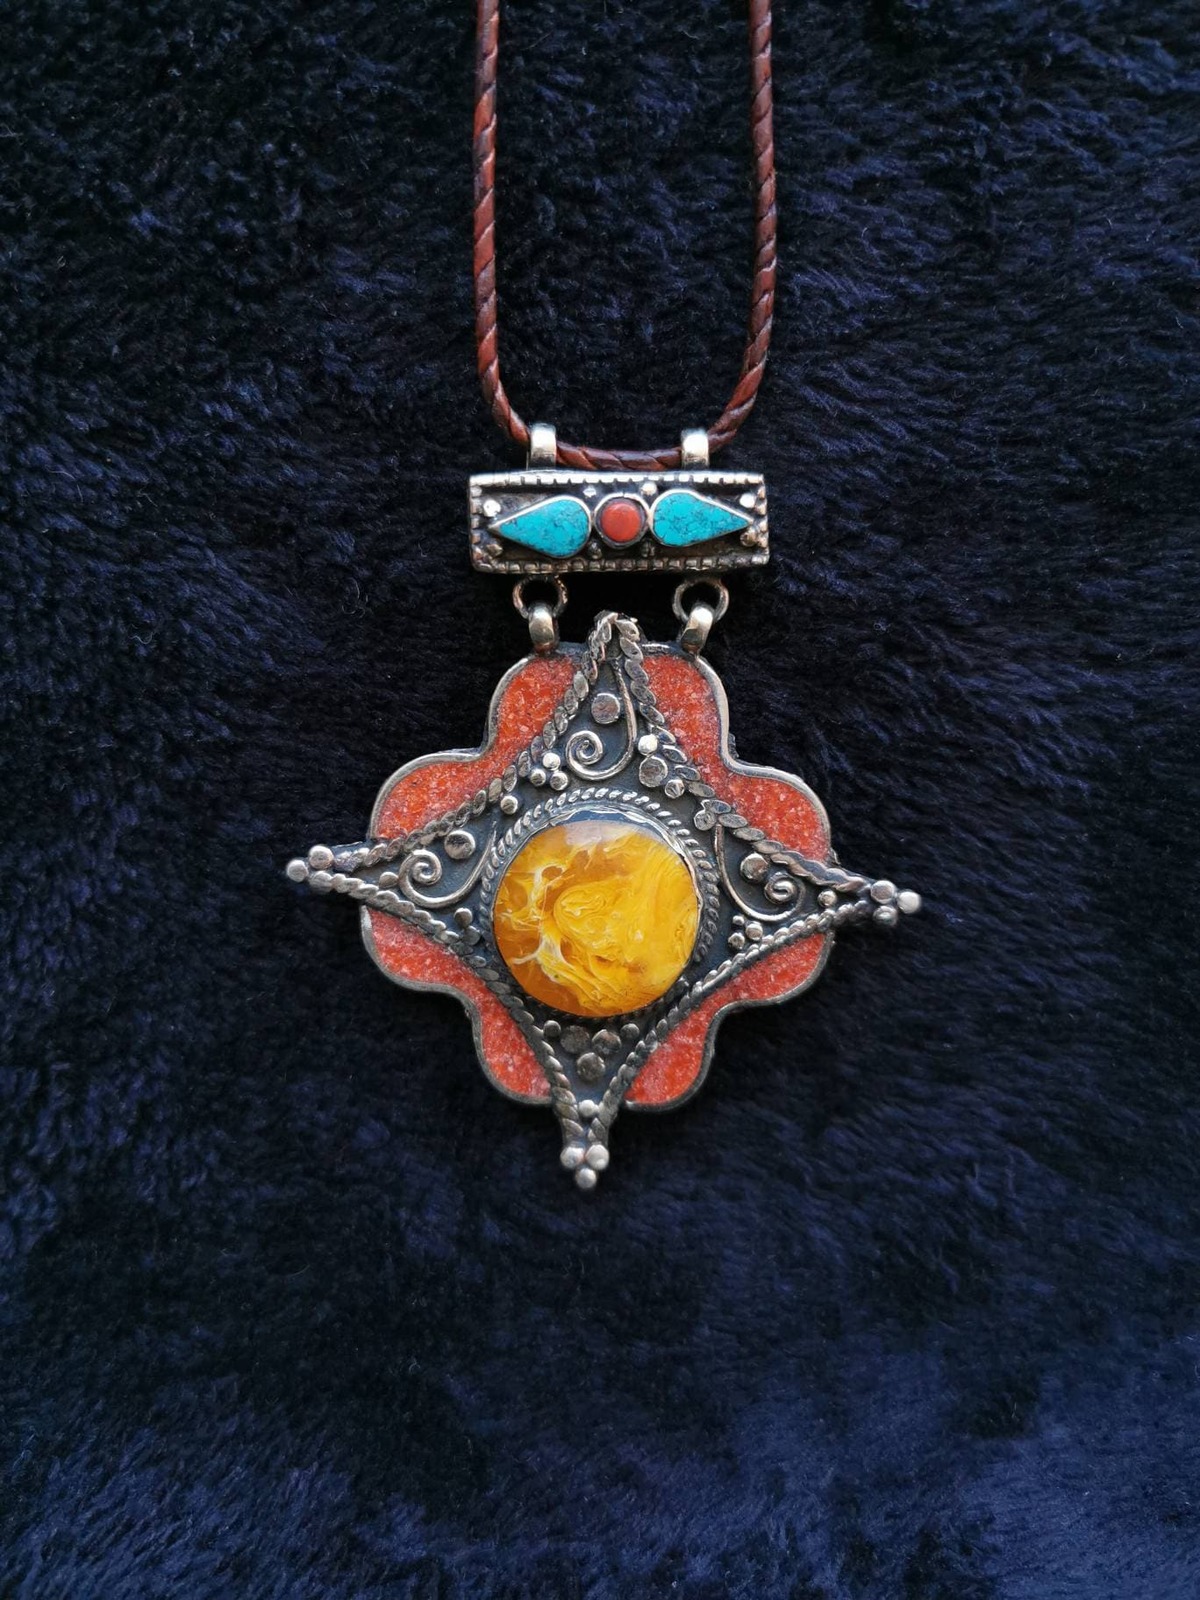 Vintage Ethnic Pendant, Berber Silver and Stones Pendant, Vintage Red and Orange - $95.00